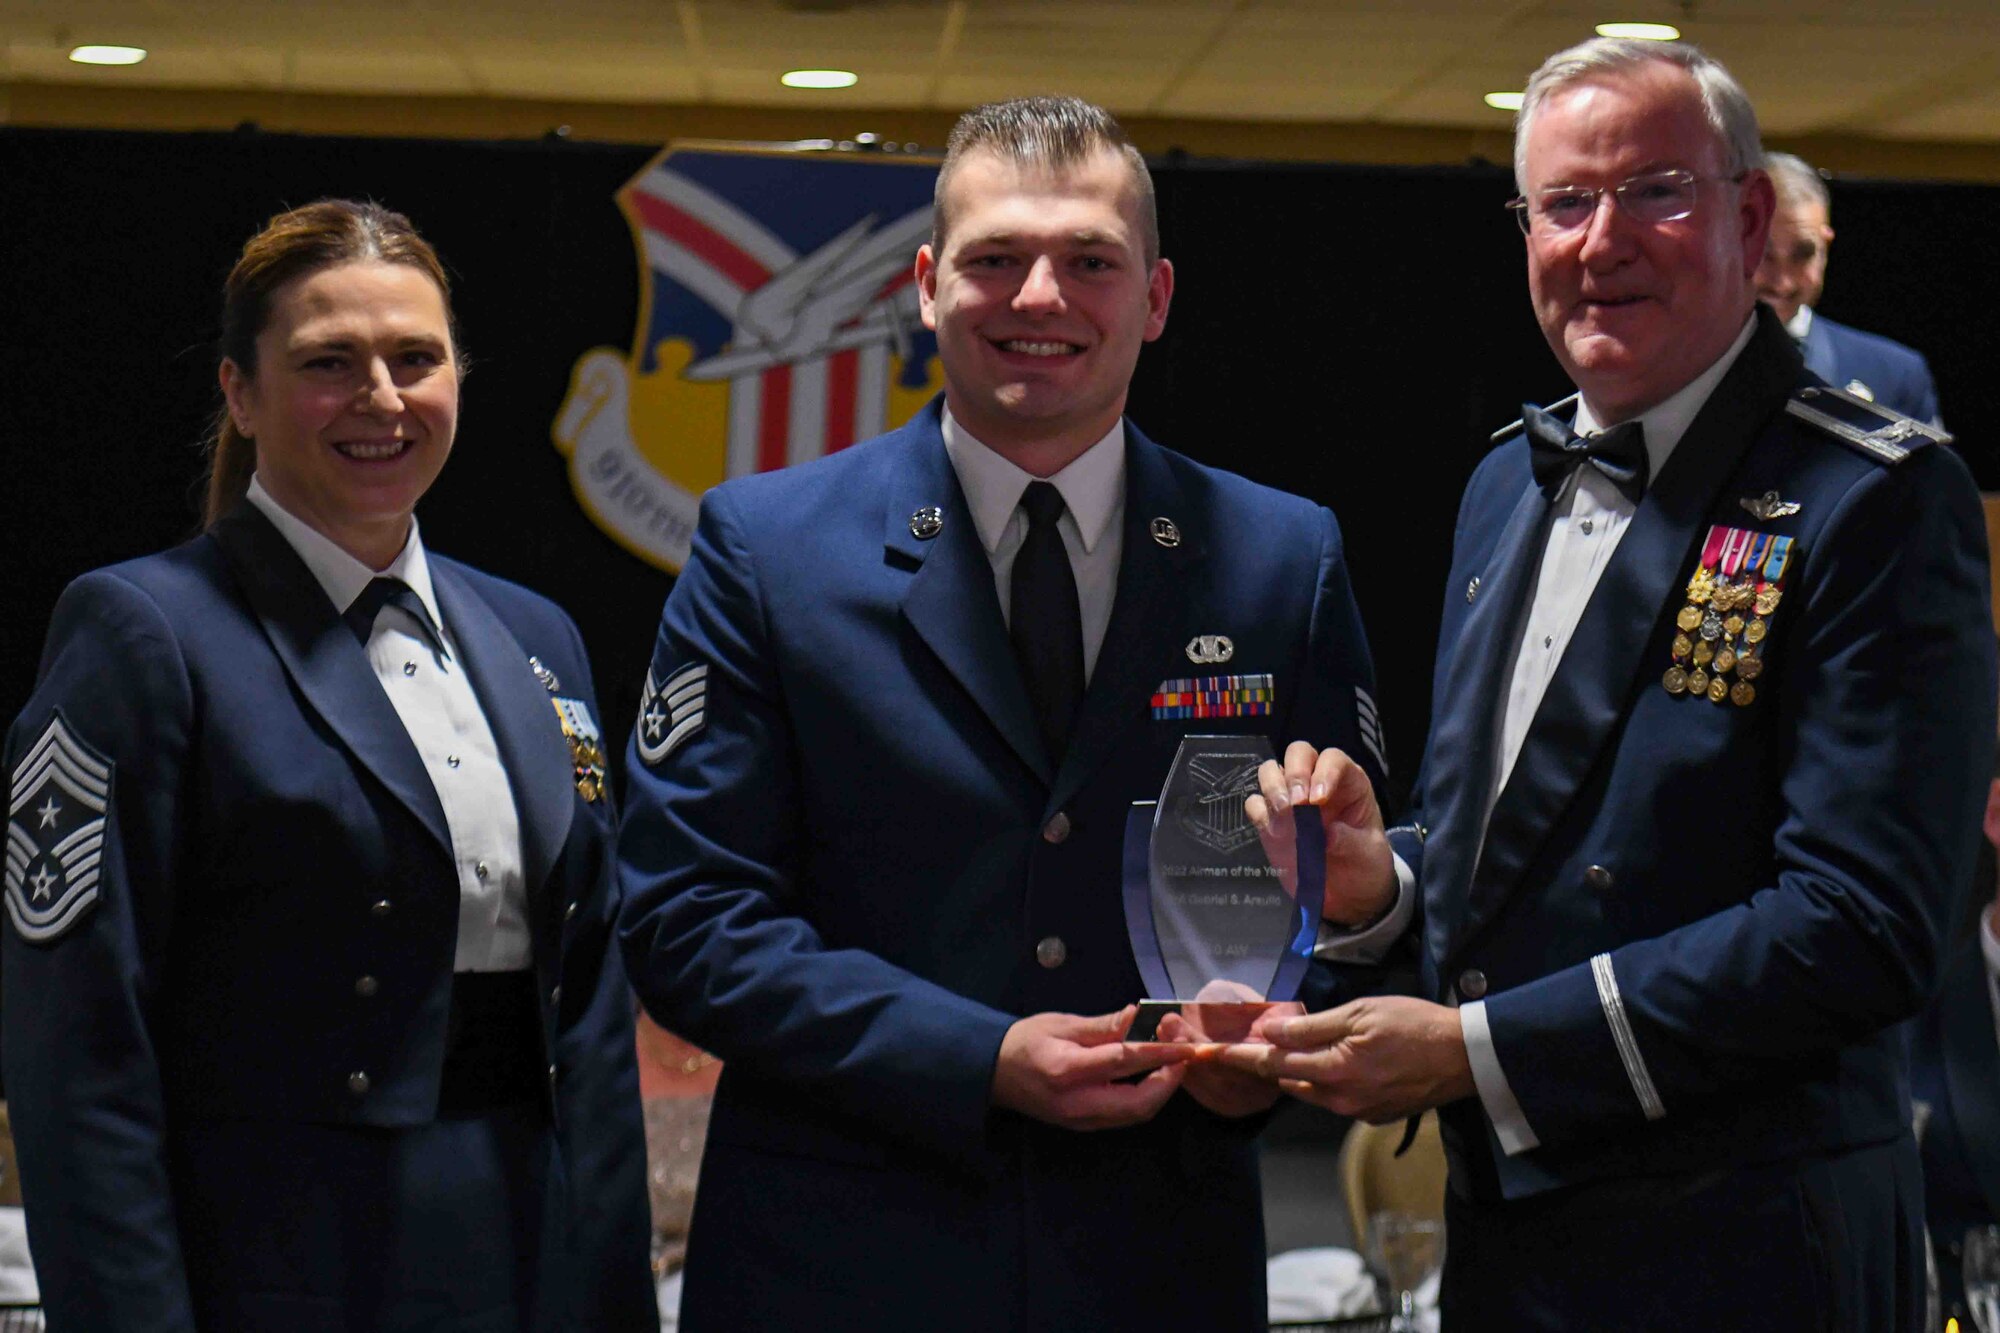 Staff Sgt. Gabriel Arsulic (center), the development and training flight leader assigned to the 910th Airlift Wing, receives the 2022 Airman of the Year award from 910th AW Commander Col. Jeff Van Dootingh (right) and 910th AW Command Chief Master Sgt. Jennifer McKendree (left), during the unit’s annual awards banquet, March 4, 2023, at Youngstown Air Reserve Station, Ohio.